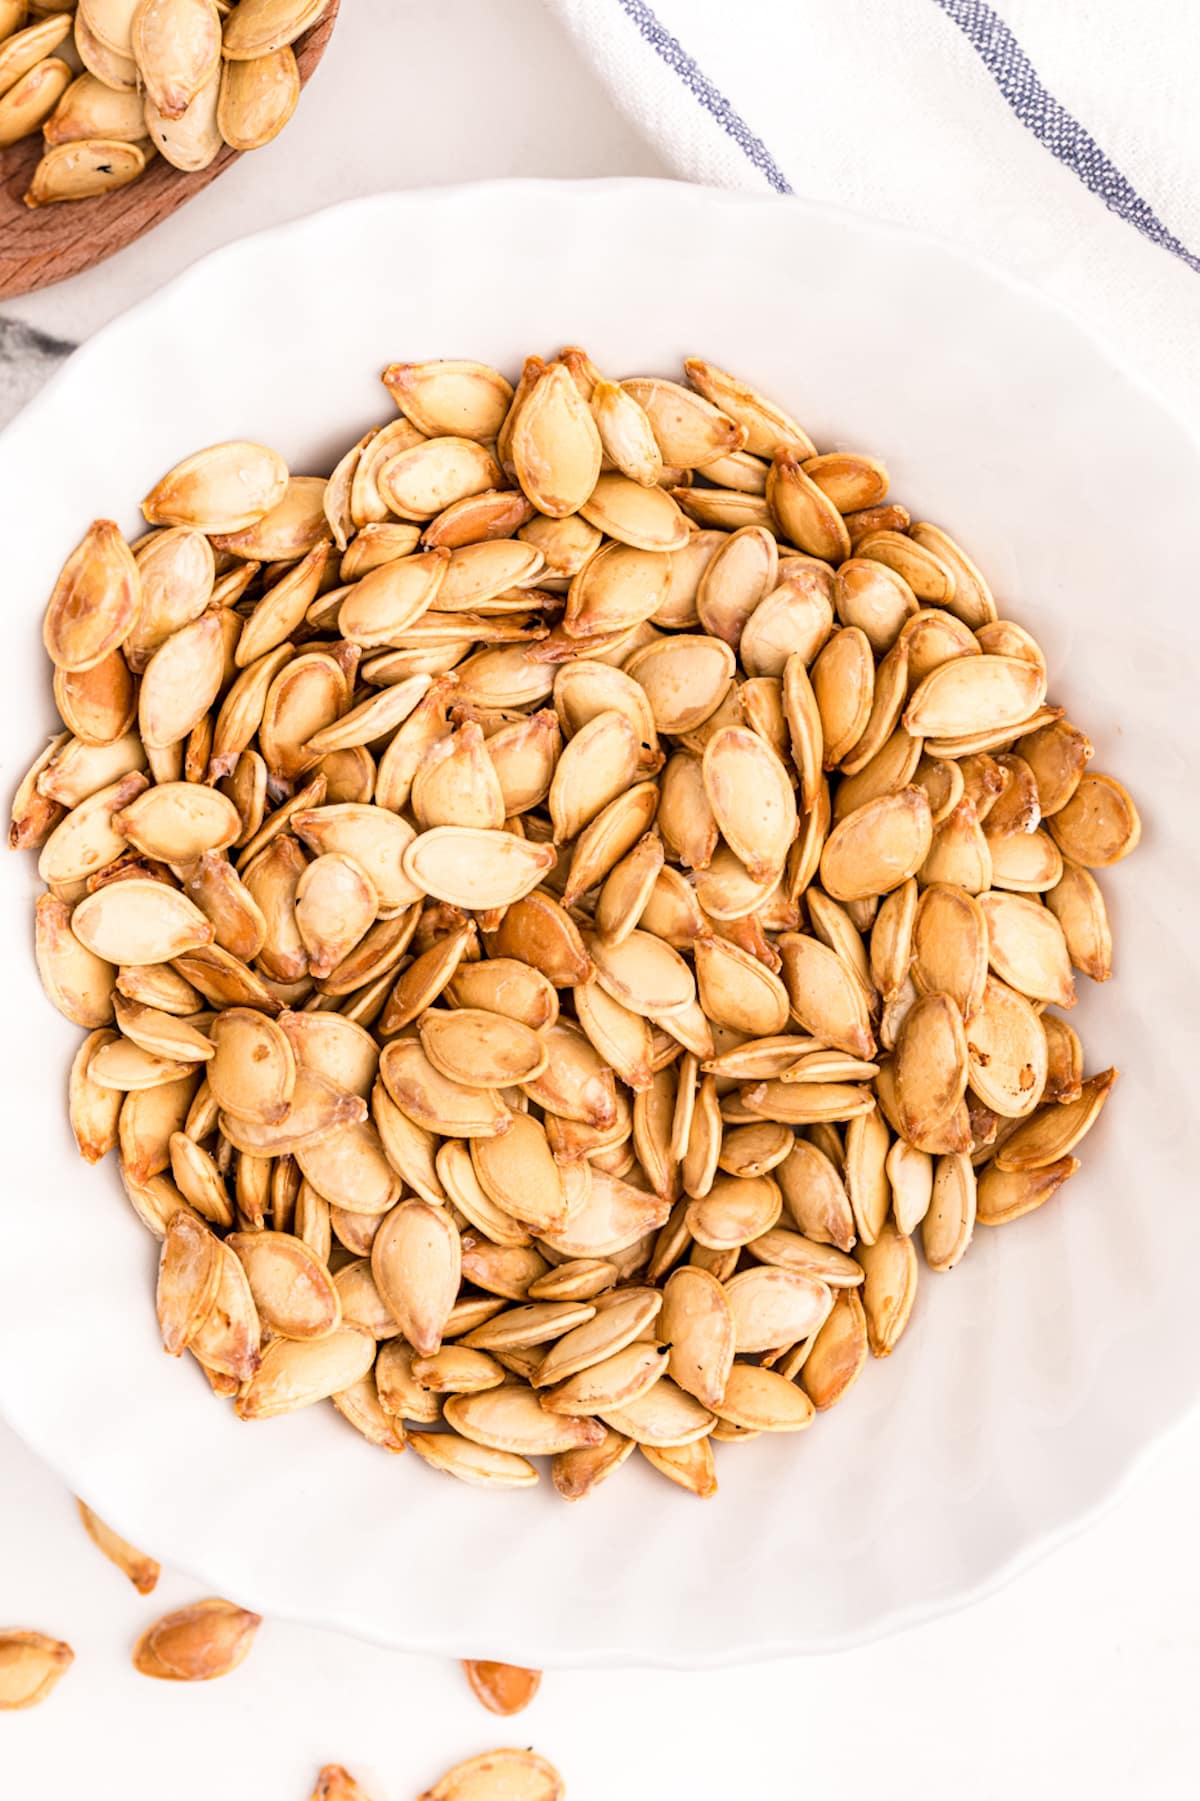 roasted air fryer pumpkin seeds served in a white bowl.